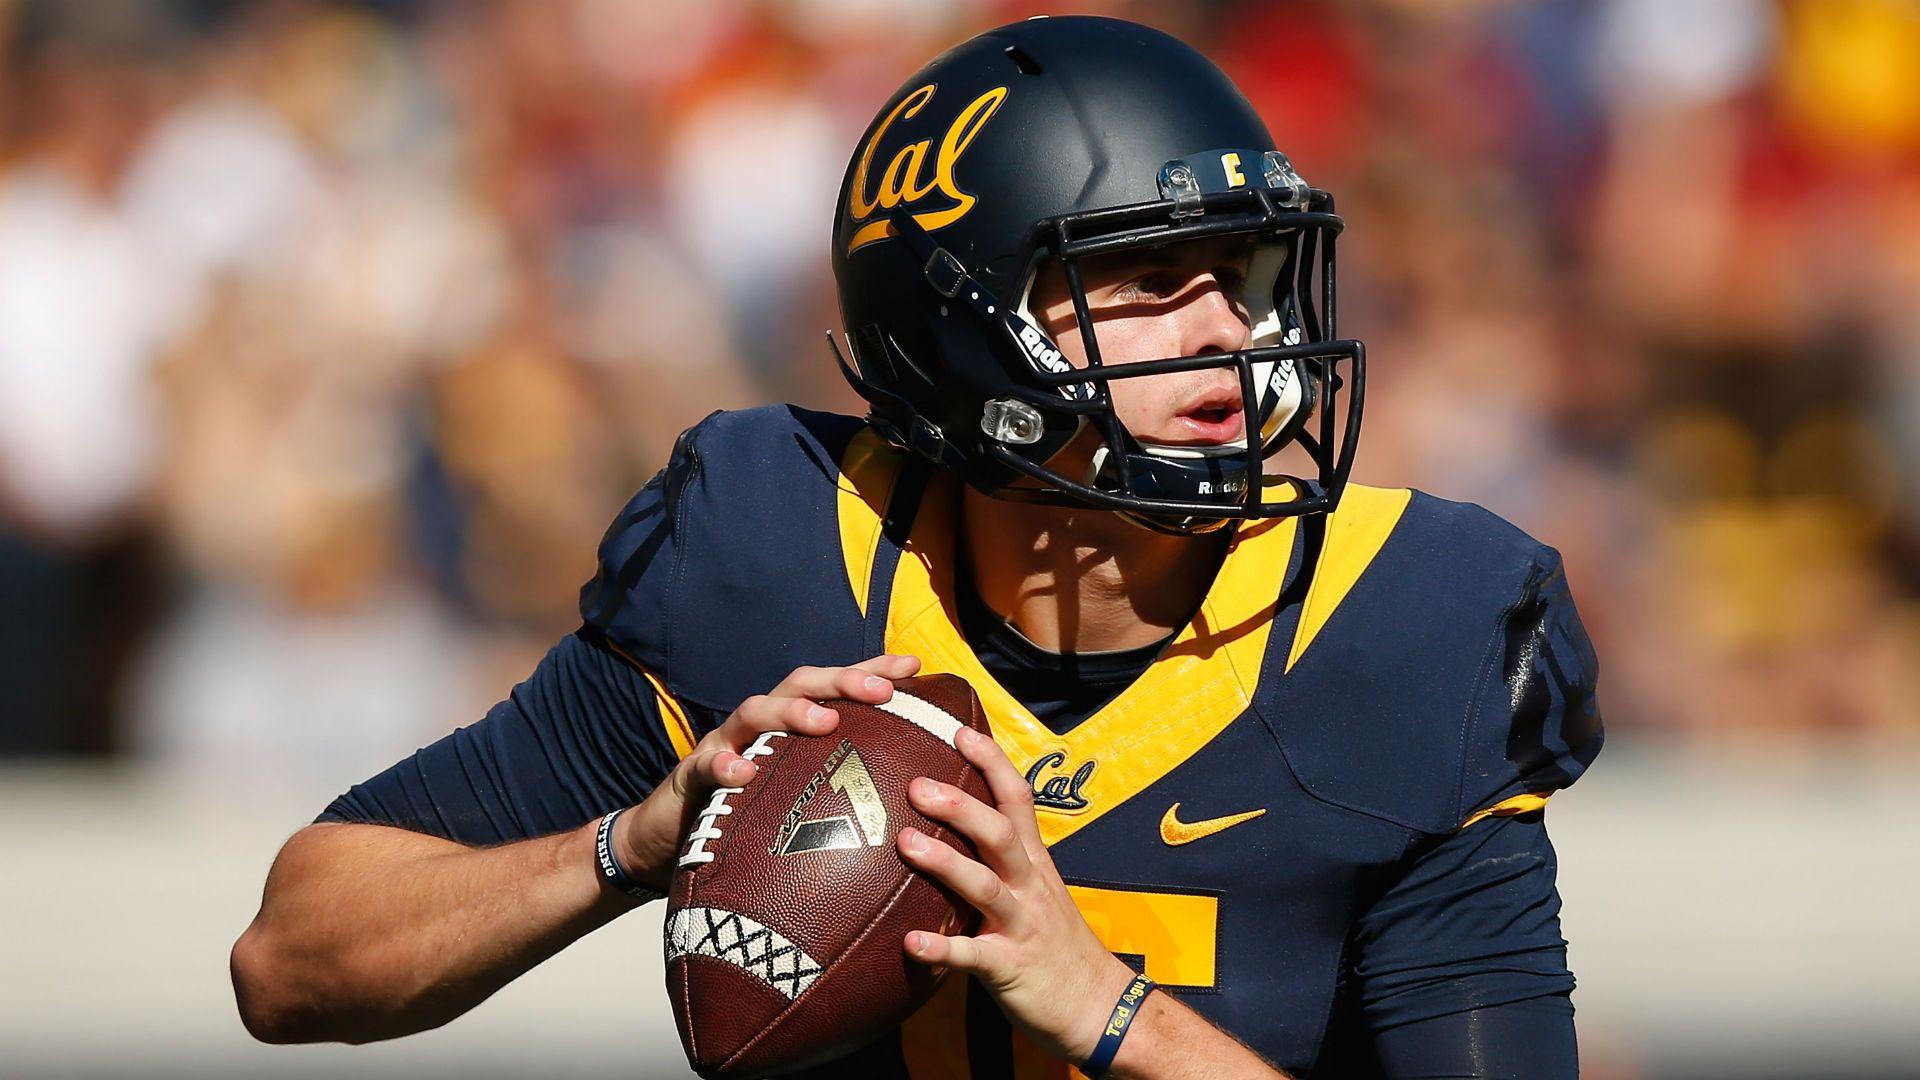 Five theories on Jared Goff's magical hand growth